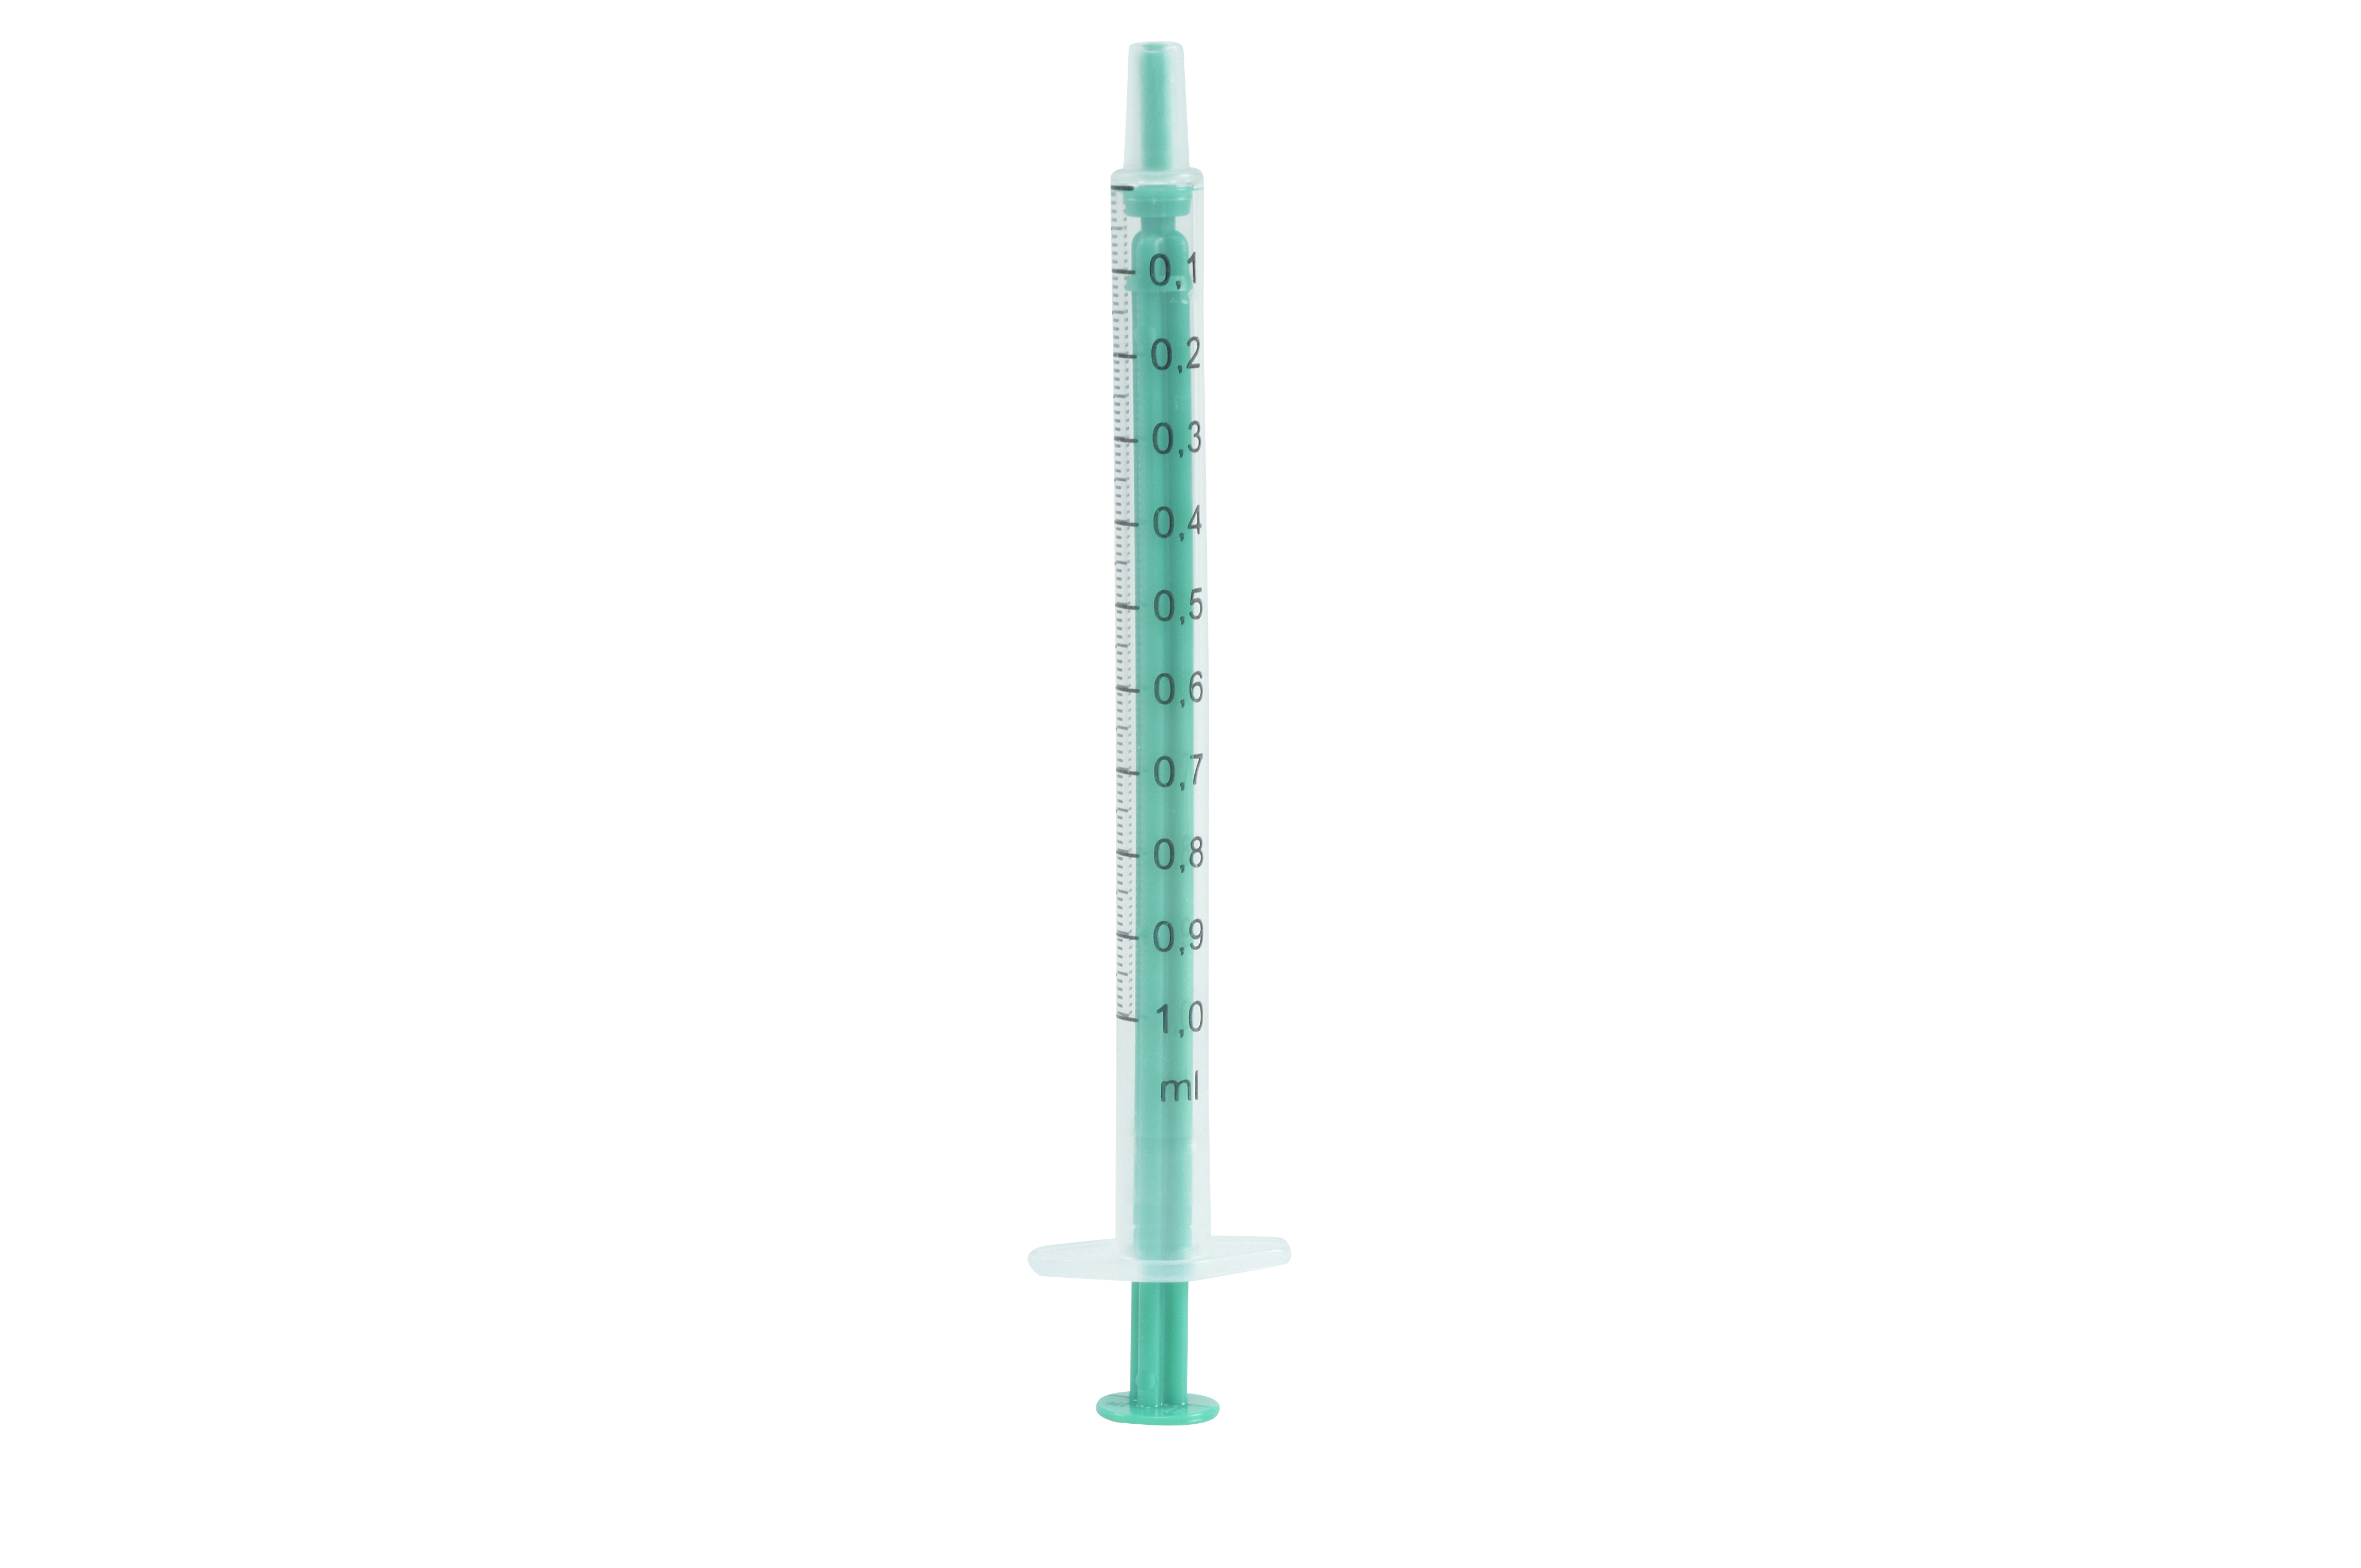 Norm-Ject (HSW HENKE-JECT®) disposable syringe, 2-component, 1 ml, Luer Lock, 100/pk